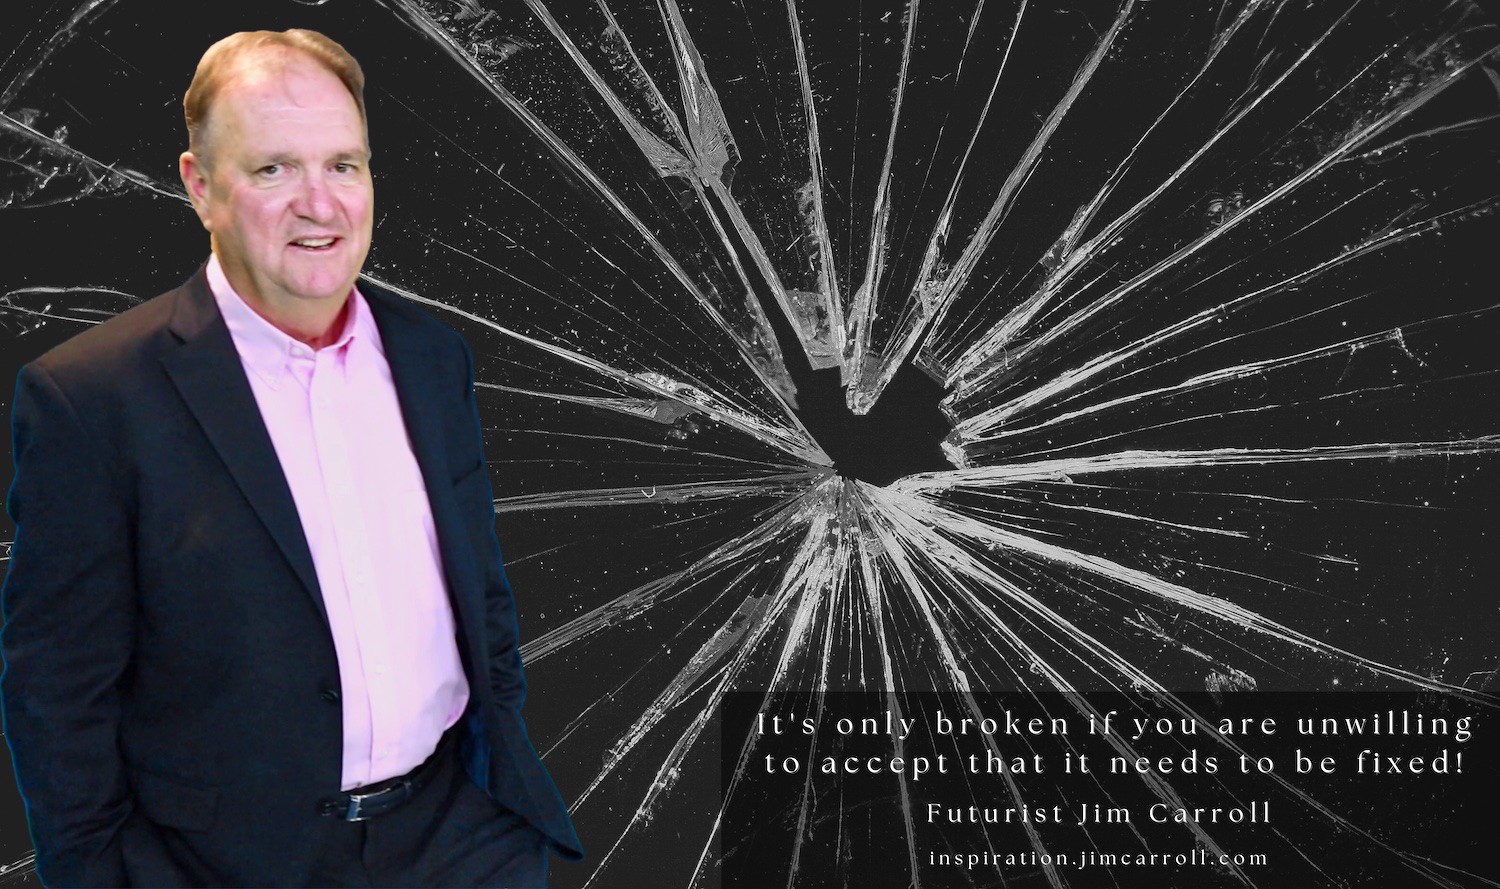 "It's only broken if you are unwilling to accept that it needs to be fixed!" - Futurist Jim Carroll